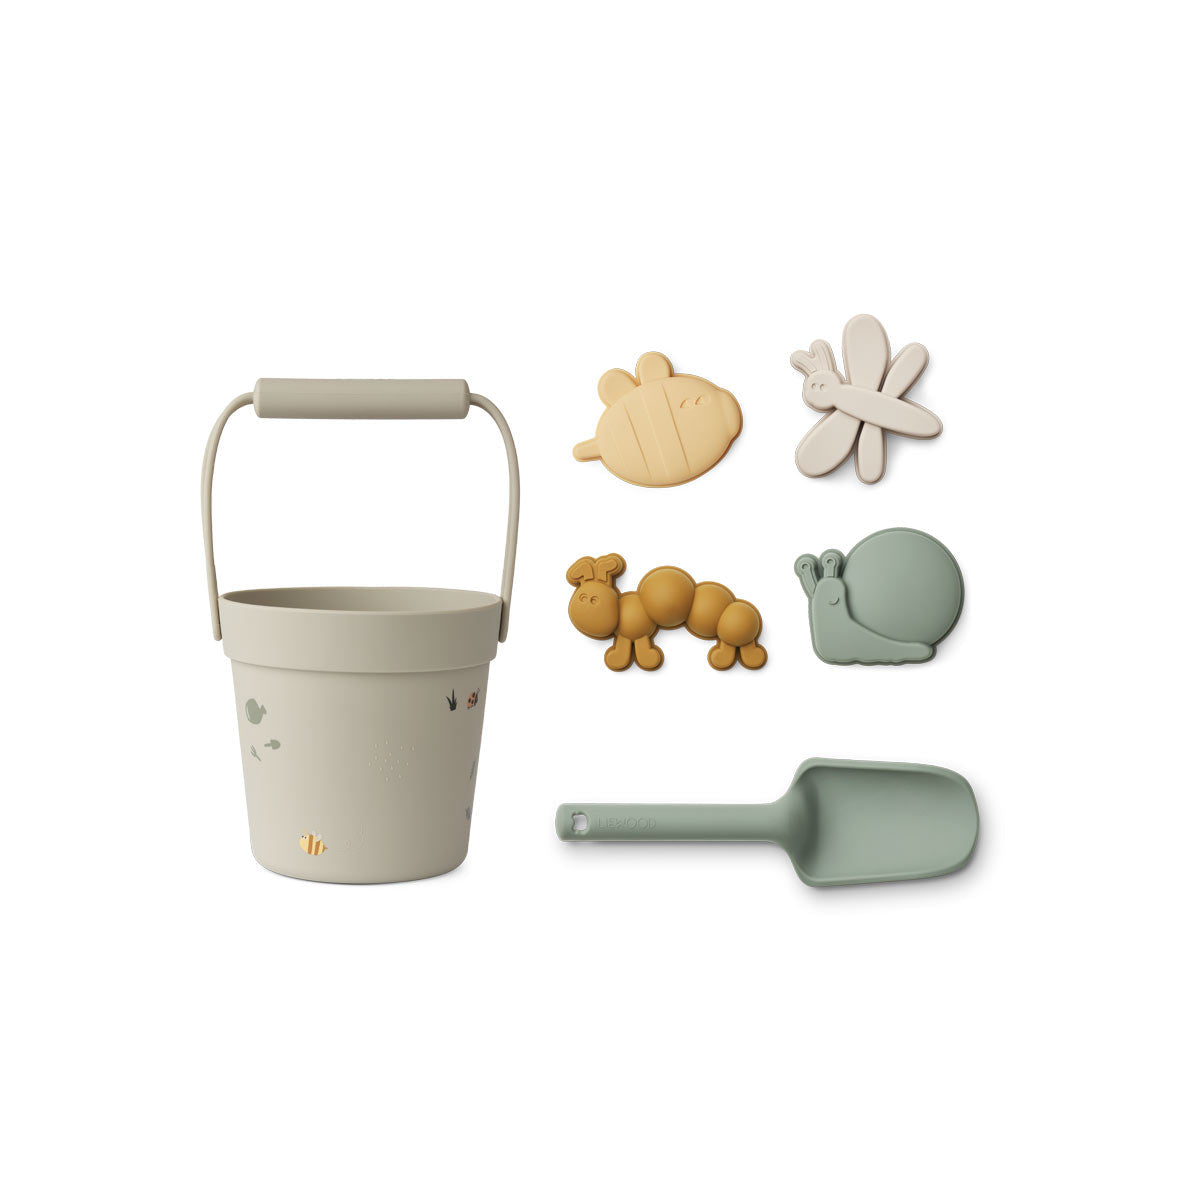 The Liewood Dante Silicone Beach Set | Nature/Mist Mix is Perfect for Summer Days in the Garden or at the Beach.